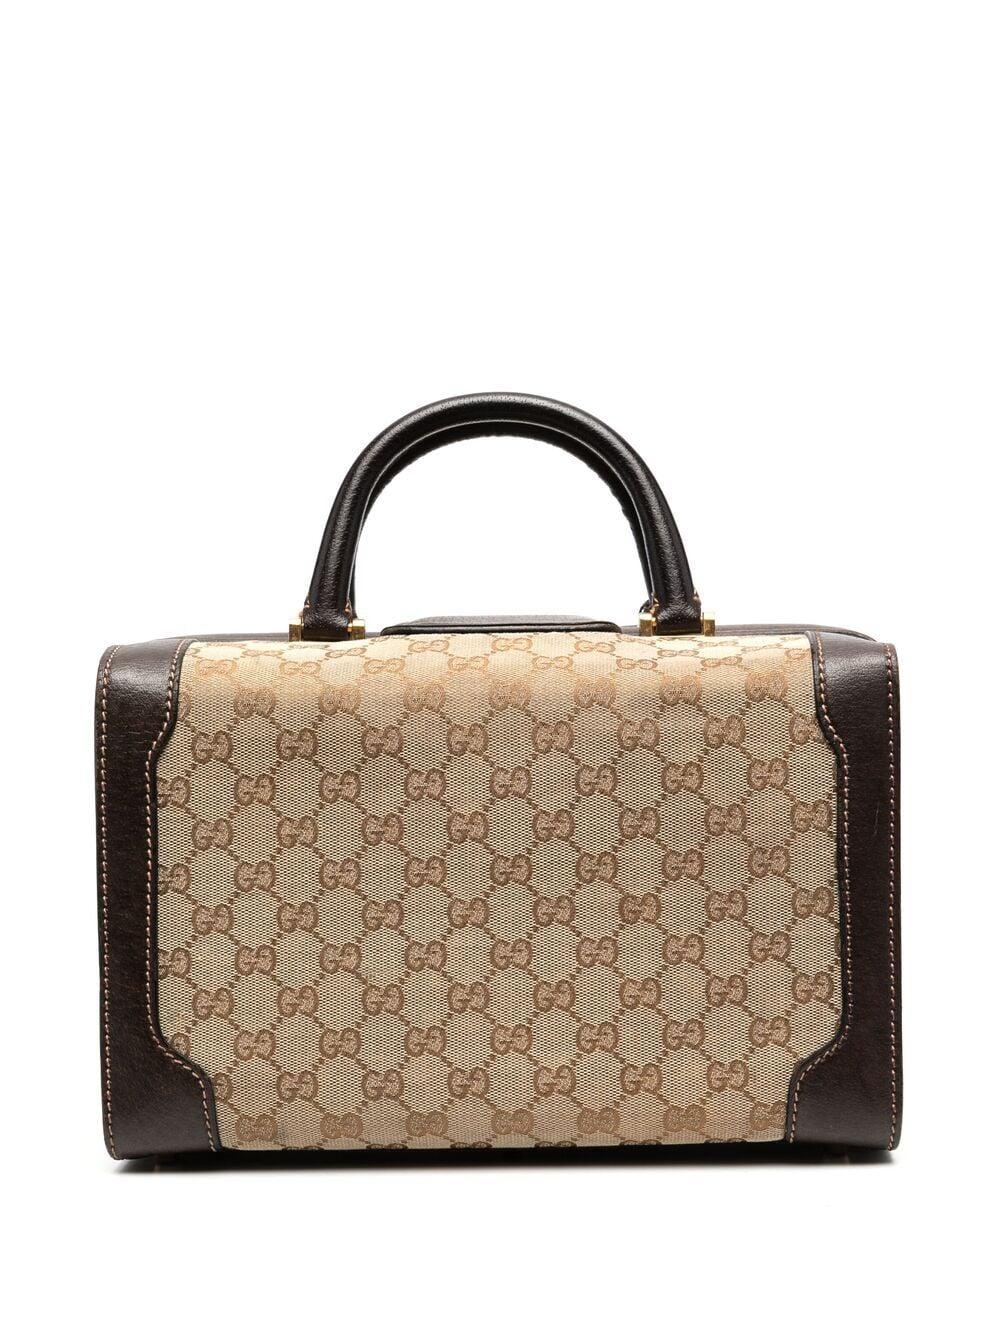 Gucci brown canvas & leather  vanity-case bag featuring a brown leather finishing, top leather handles, a canvas logo pattern, gold-tone hardware, inside compartments, an inside gold tone logo stamp. 
Width 11.8in. (30cm) 
Height 7.8in. (20cm)
Width